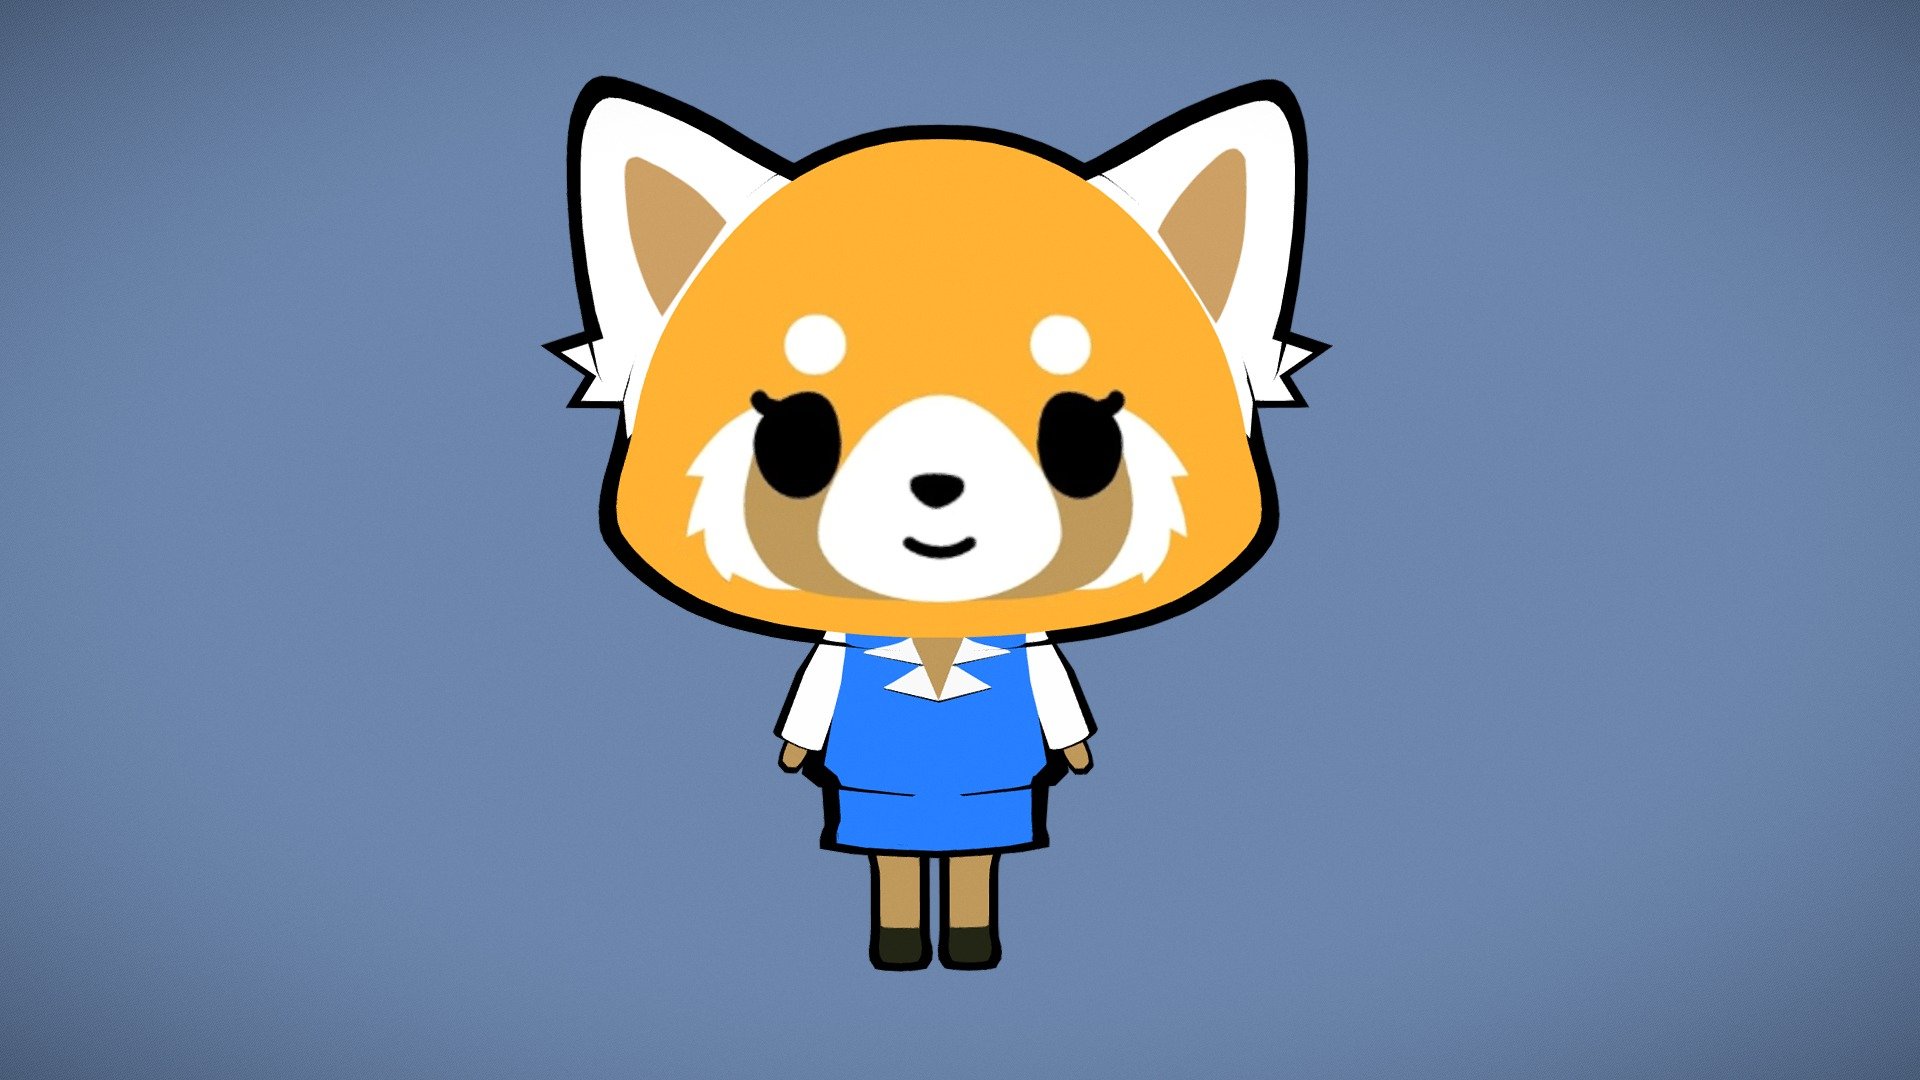 Model made in Blender, texturized in Substance Painter.
First time I try some cartoon character!

Aggretsuko belongs to Sanrio - Retsuko - 3D model by vicpirona 3d model